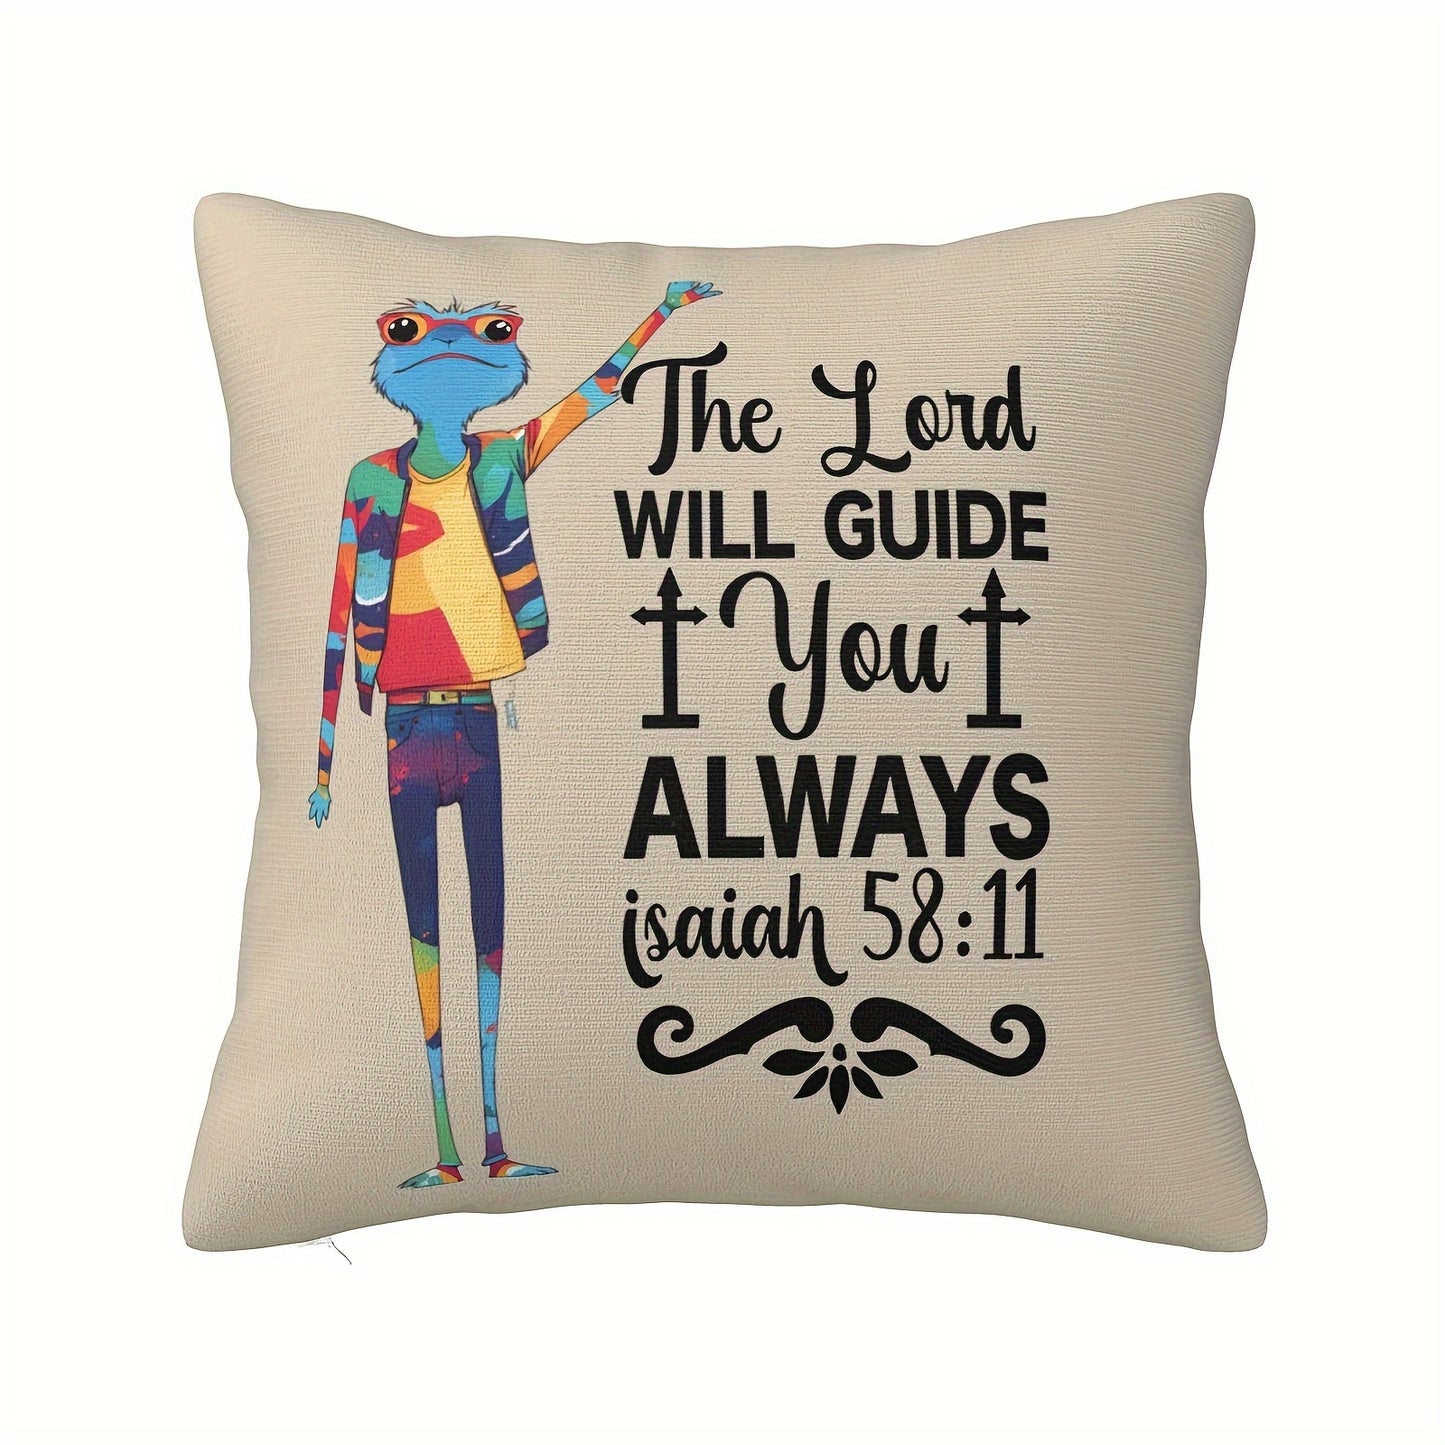 The Lord Will Guide You  Always Christian Throw Pillow 18x18inch claimedbygoddesigns